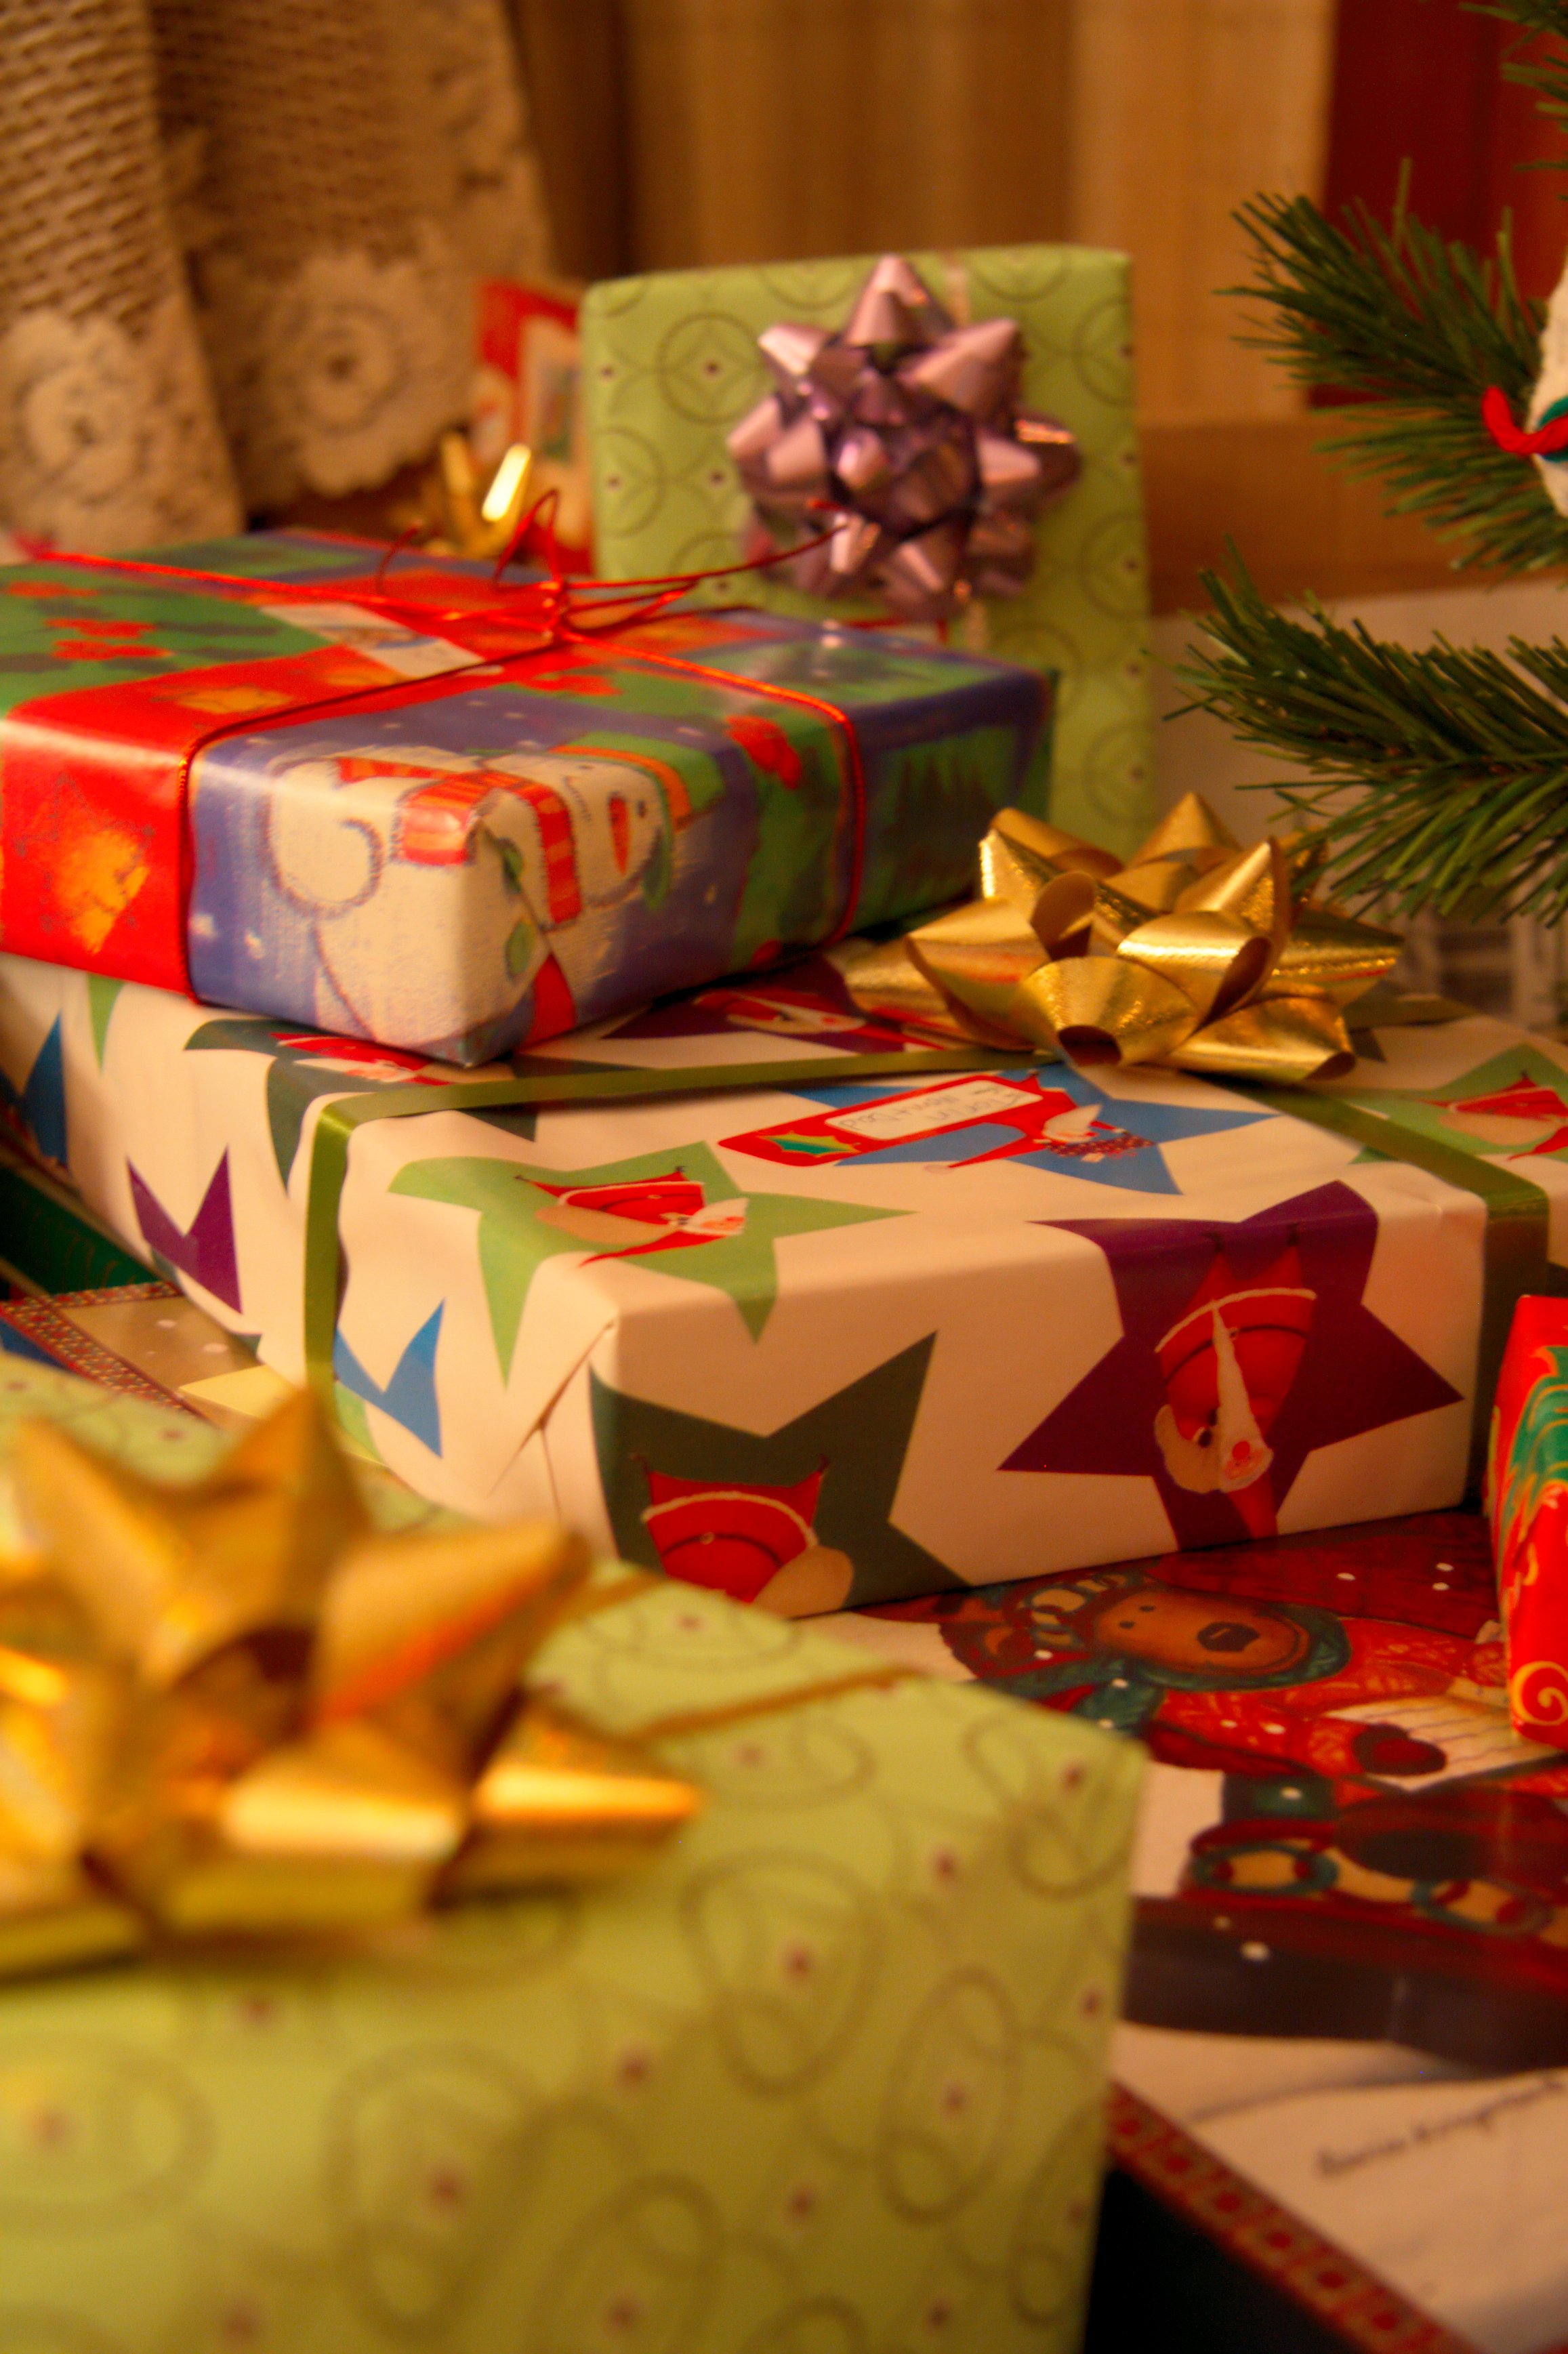 Wrapped Christmas Presents | Mulad  -  Foter.com  -  CC BY